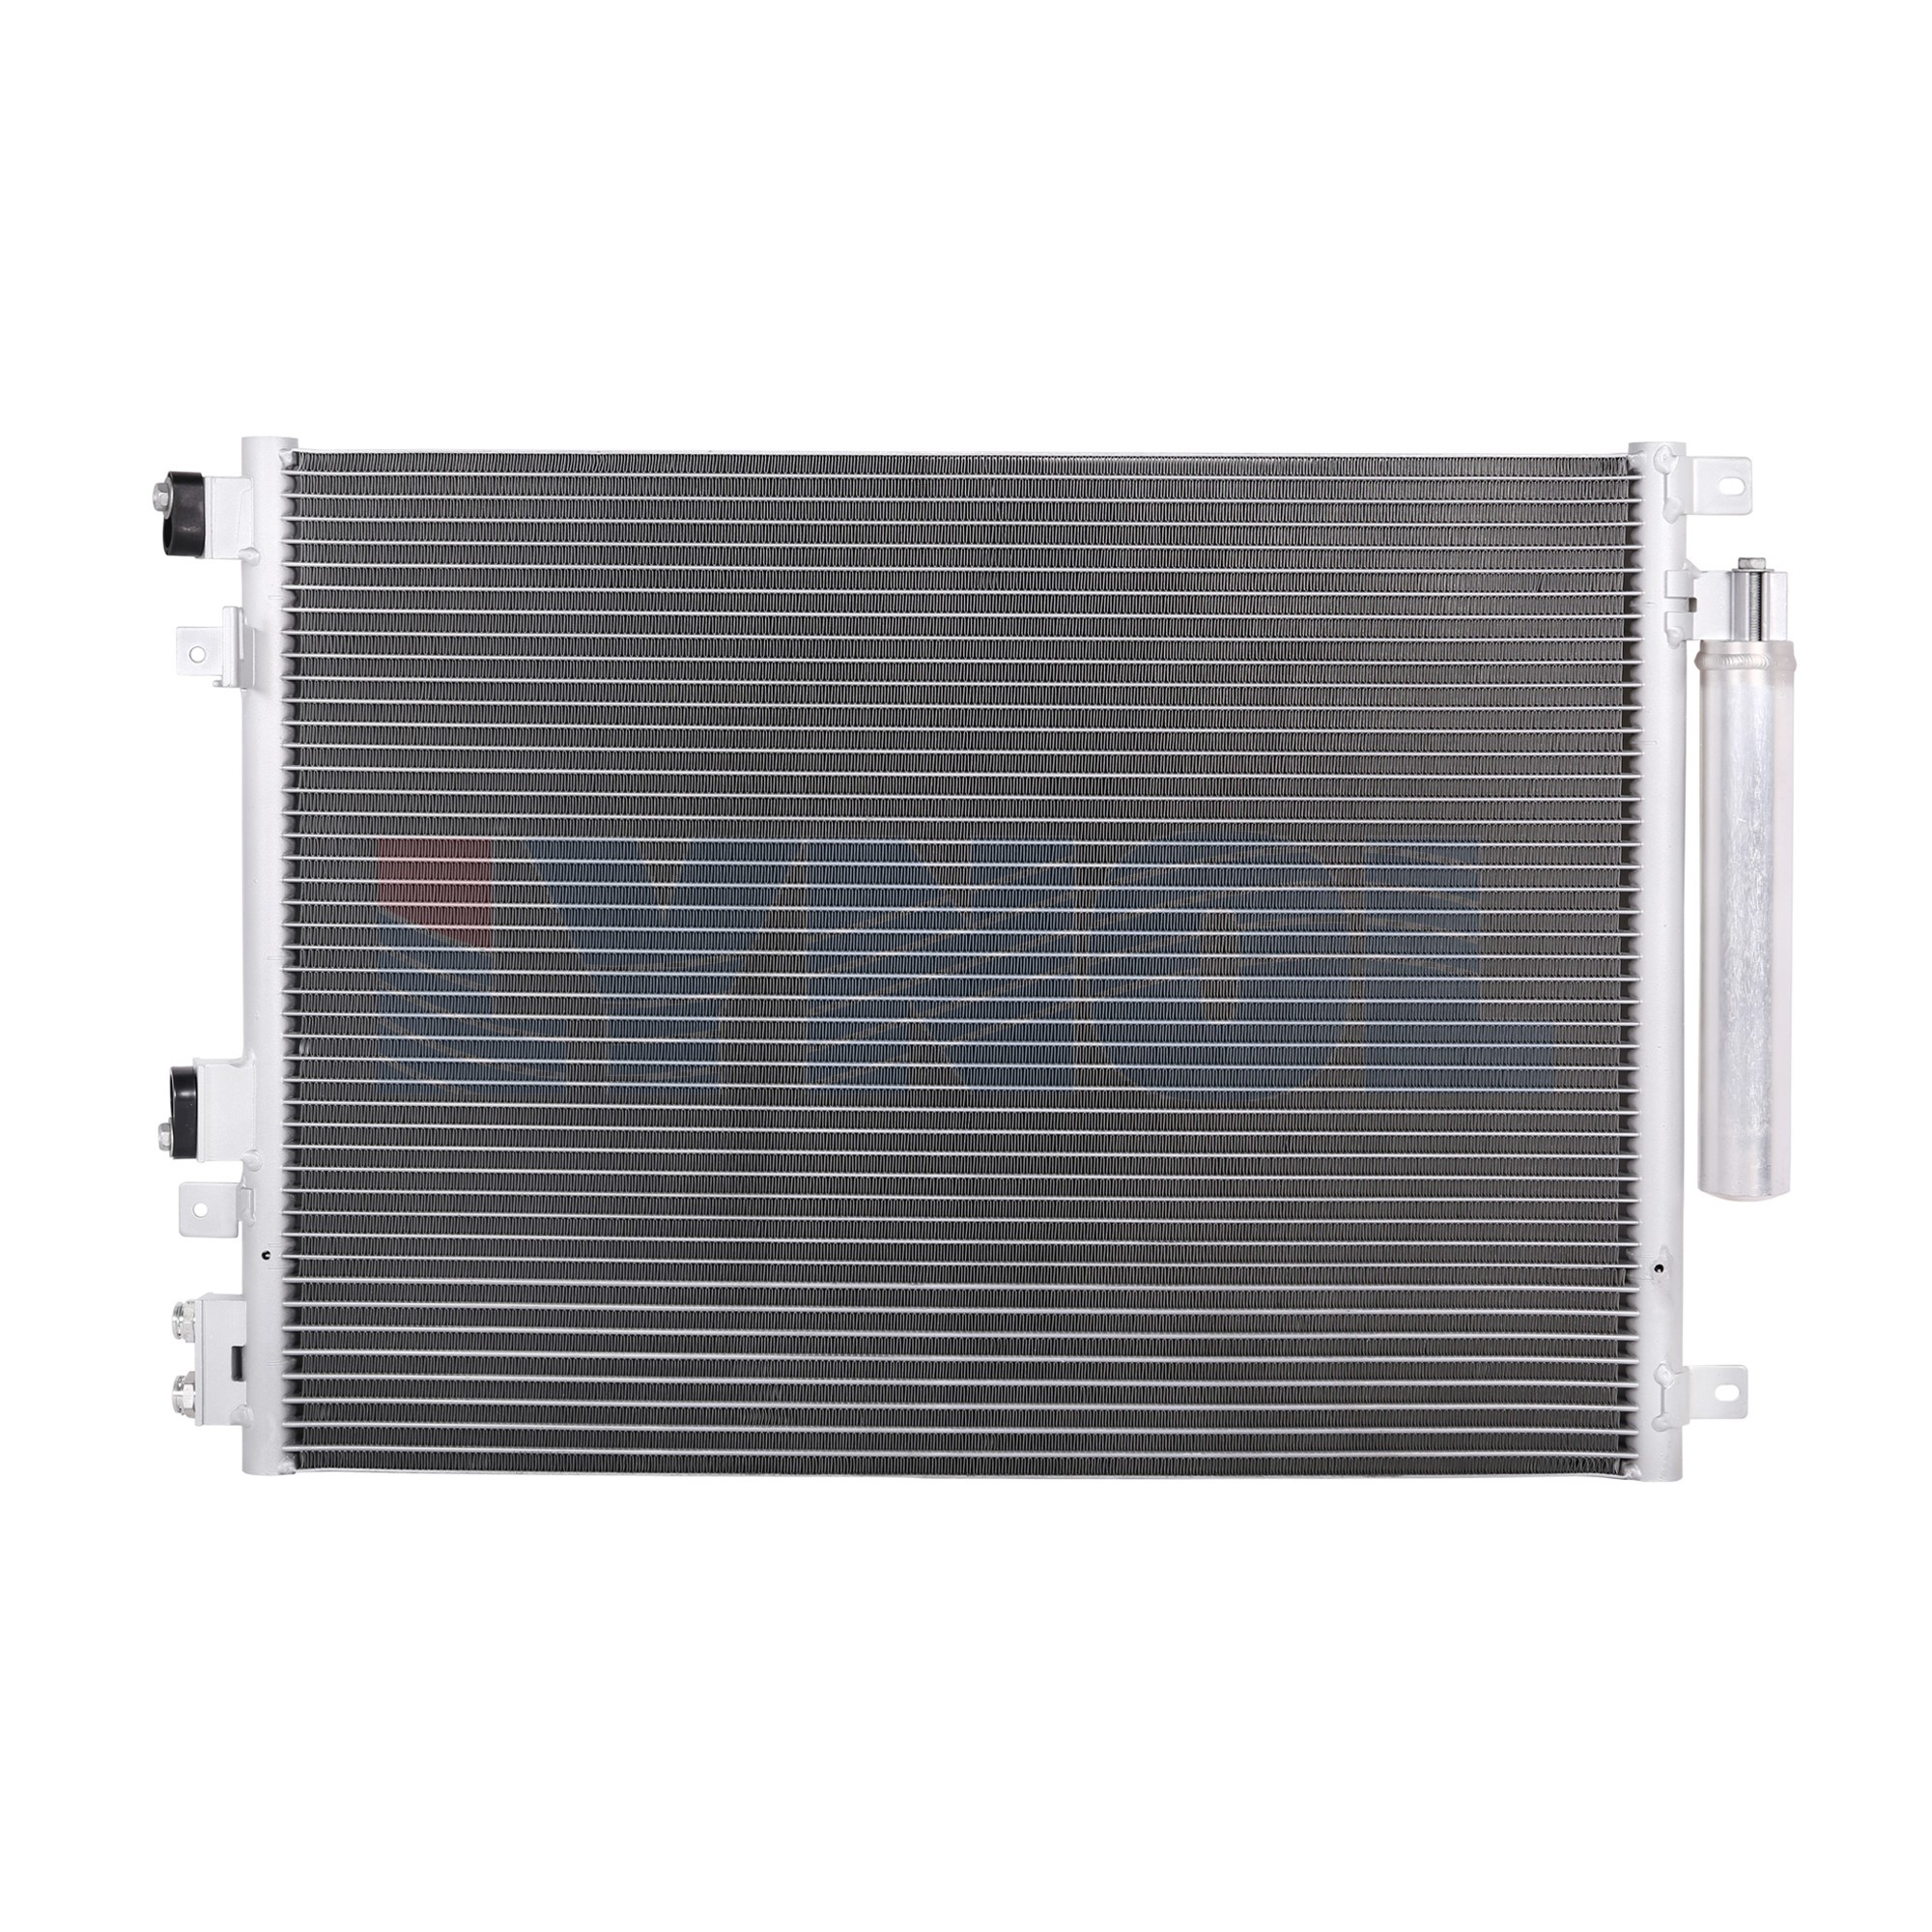 AC3237 - AC Condensers  - 05-16 Chrysler 300, Dodge Challenger / Charger / Magnum